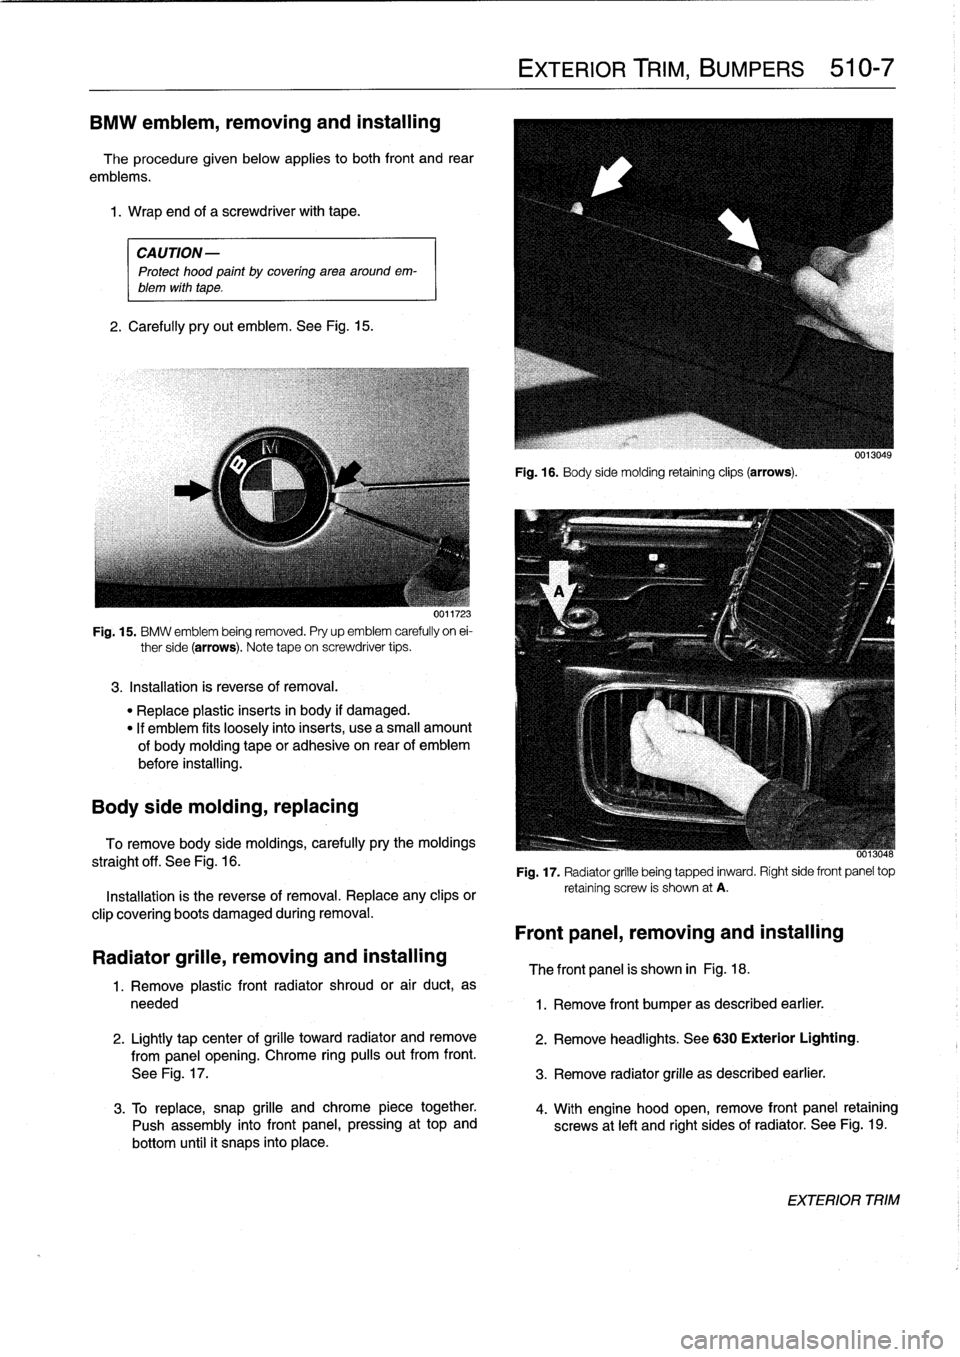 BMW 323i 1995 E36 Workshop Manual 
BMW
emblem,
removing
and
installing

The
procedure
given
below
applies
to
both
front
and
rear

emblems
.

1
.
Wrap
and
of
a
screwdriver
with
tape
.

CAUTION-

Protect
hood
paint
by
coveringarea
aroun